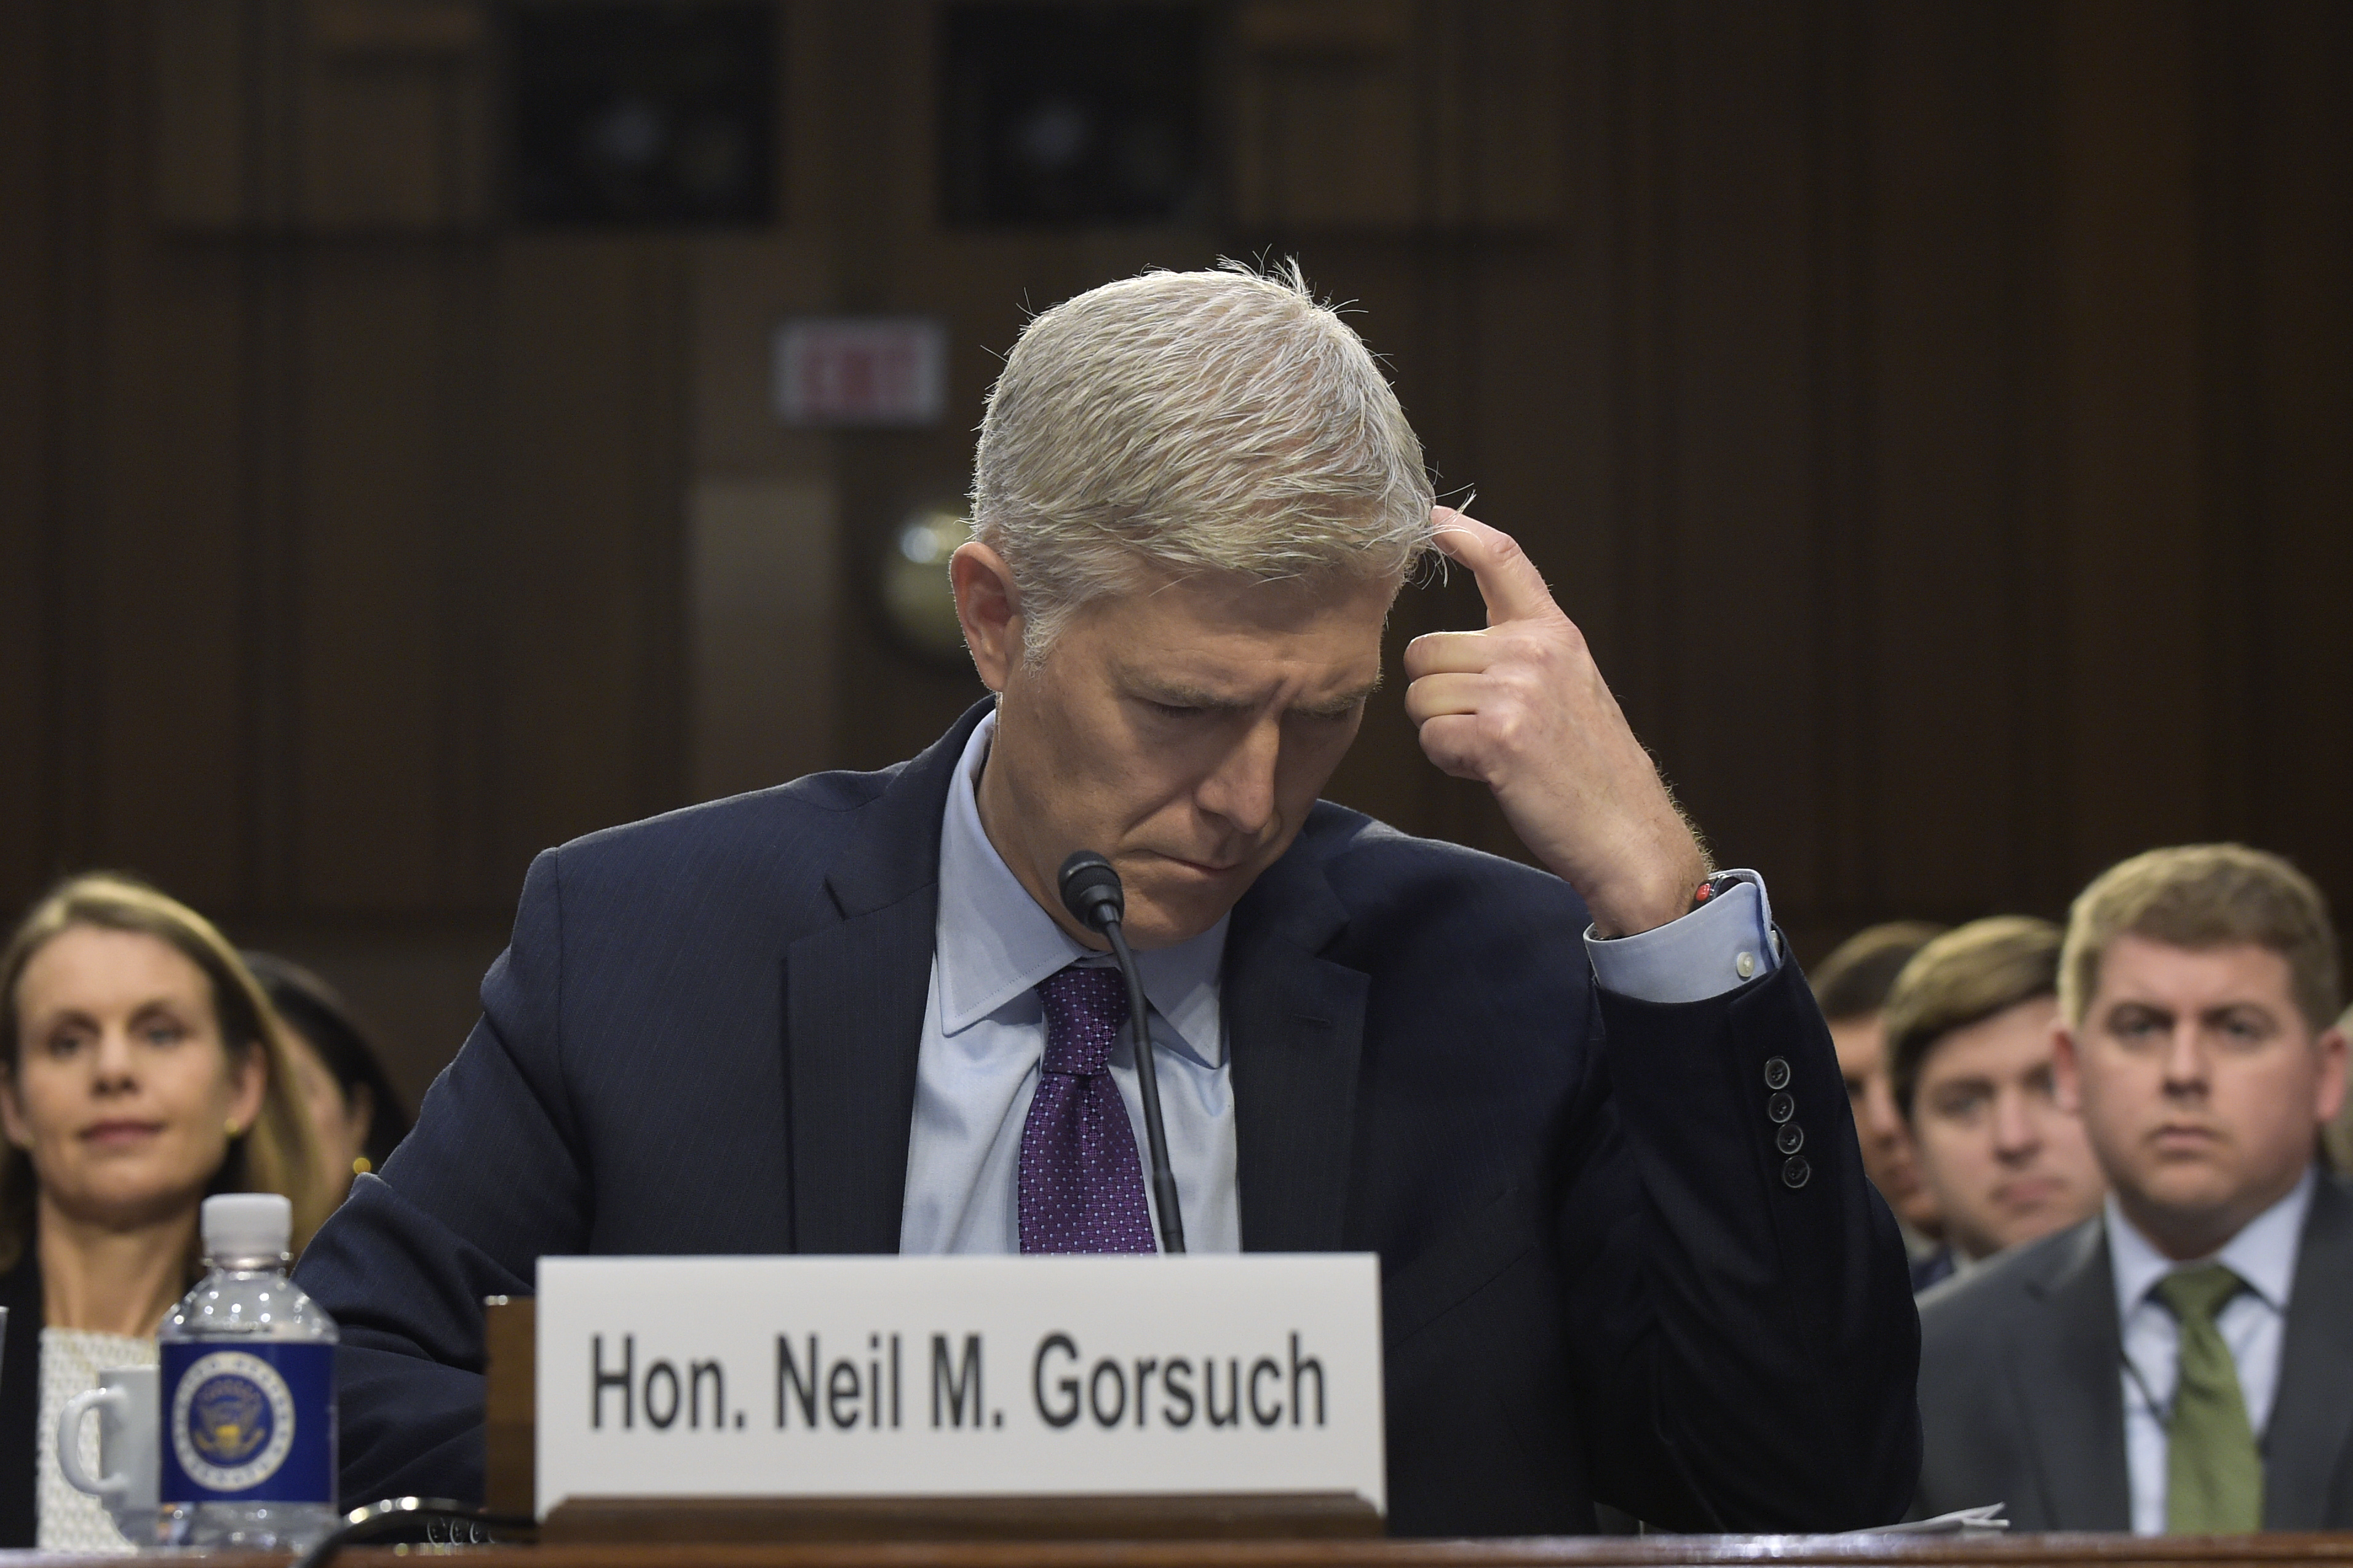 Supreme Court Justice nominee Neil Gorsuch looks over a document as he testifies on Capitol Hill in Washington, Tuesday, March 21, 2017, during his confirmation hearing before the Senate Judiciary Committee. (AP Photo/Susan Walsh)